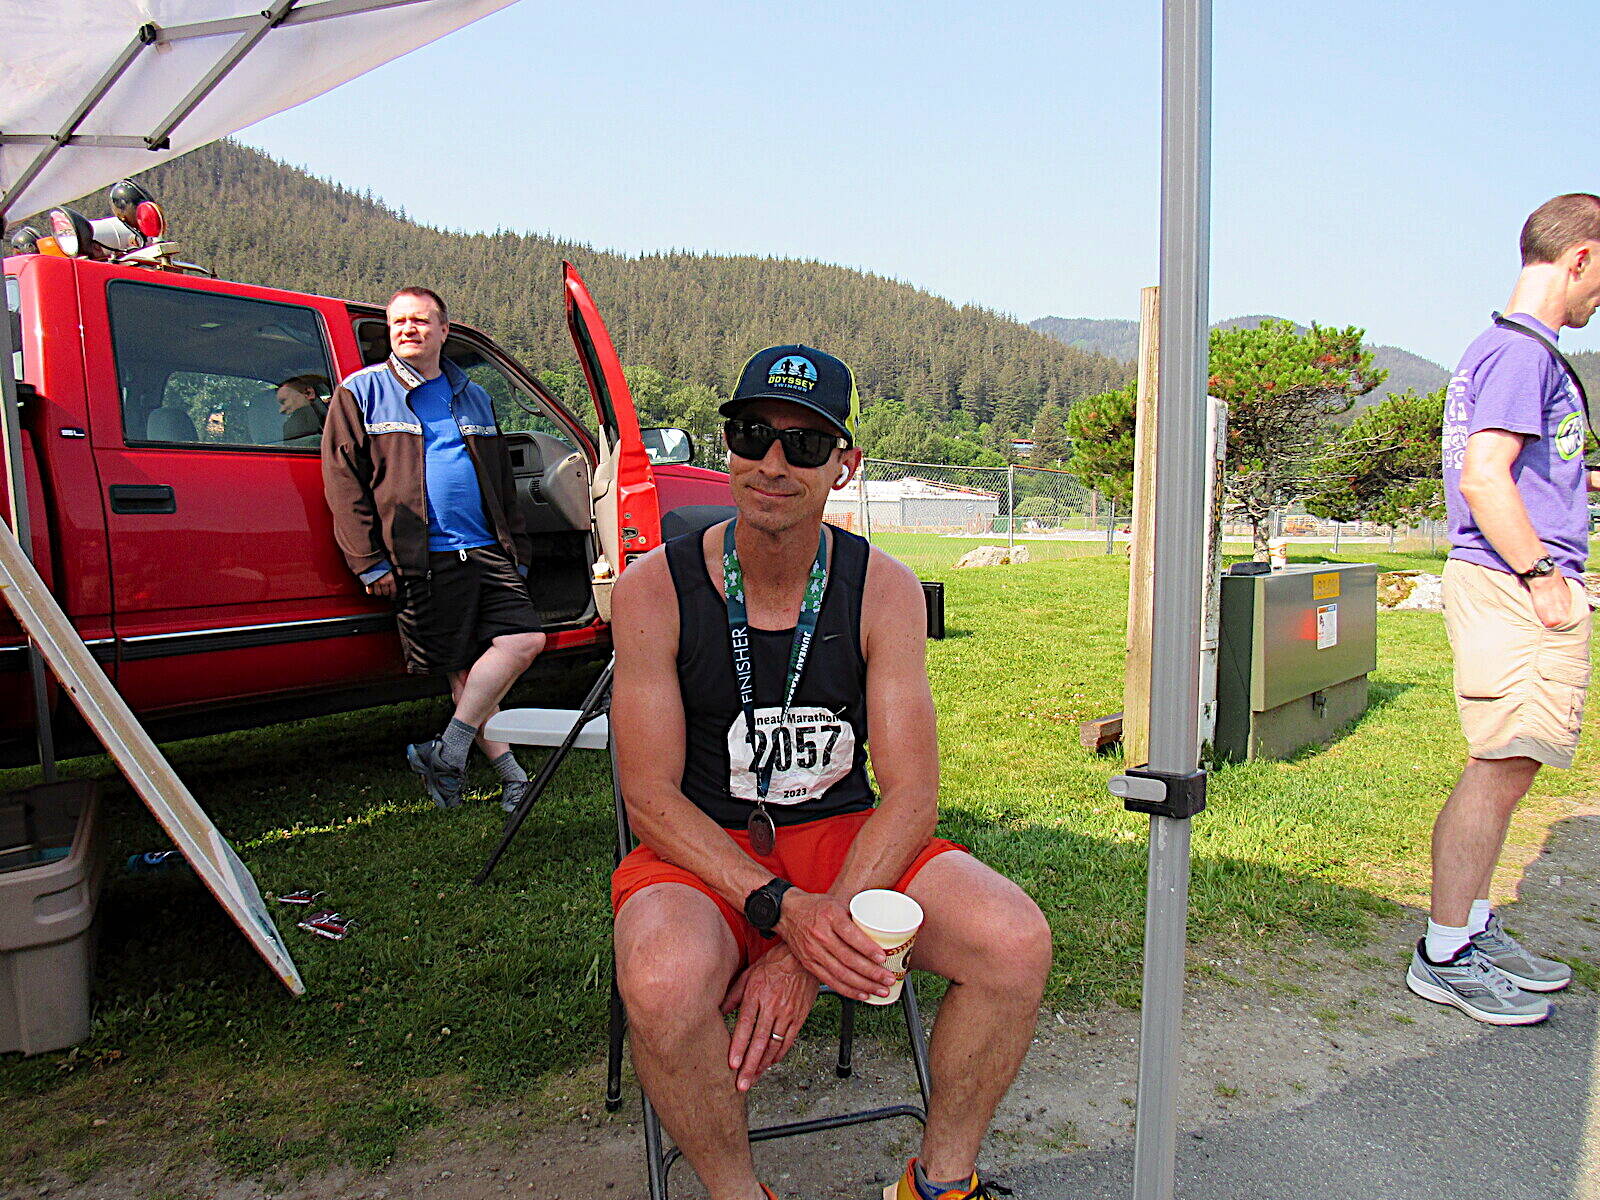 Aaron Morrison of Juneau refuels after winning the Juneau Marathon on Saturday with a time of exactly 3 hours, 11 minutes. Gabby Rockwood of Park City, Utah, was the fastest woman with a time of 3:39:14. (Photo courtesy of Juneau Trail and Road Runners)